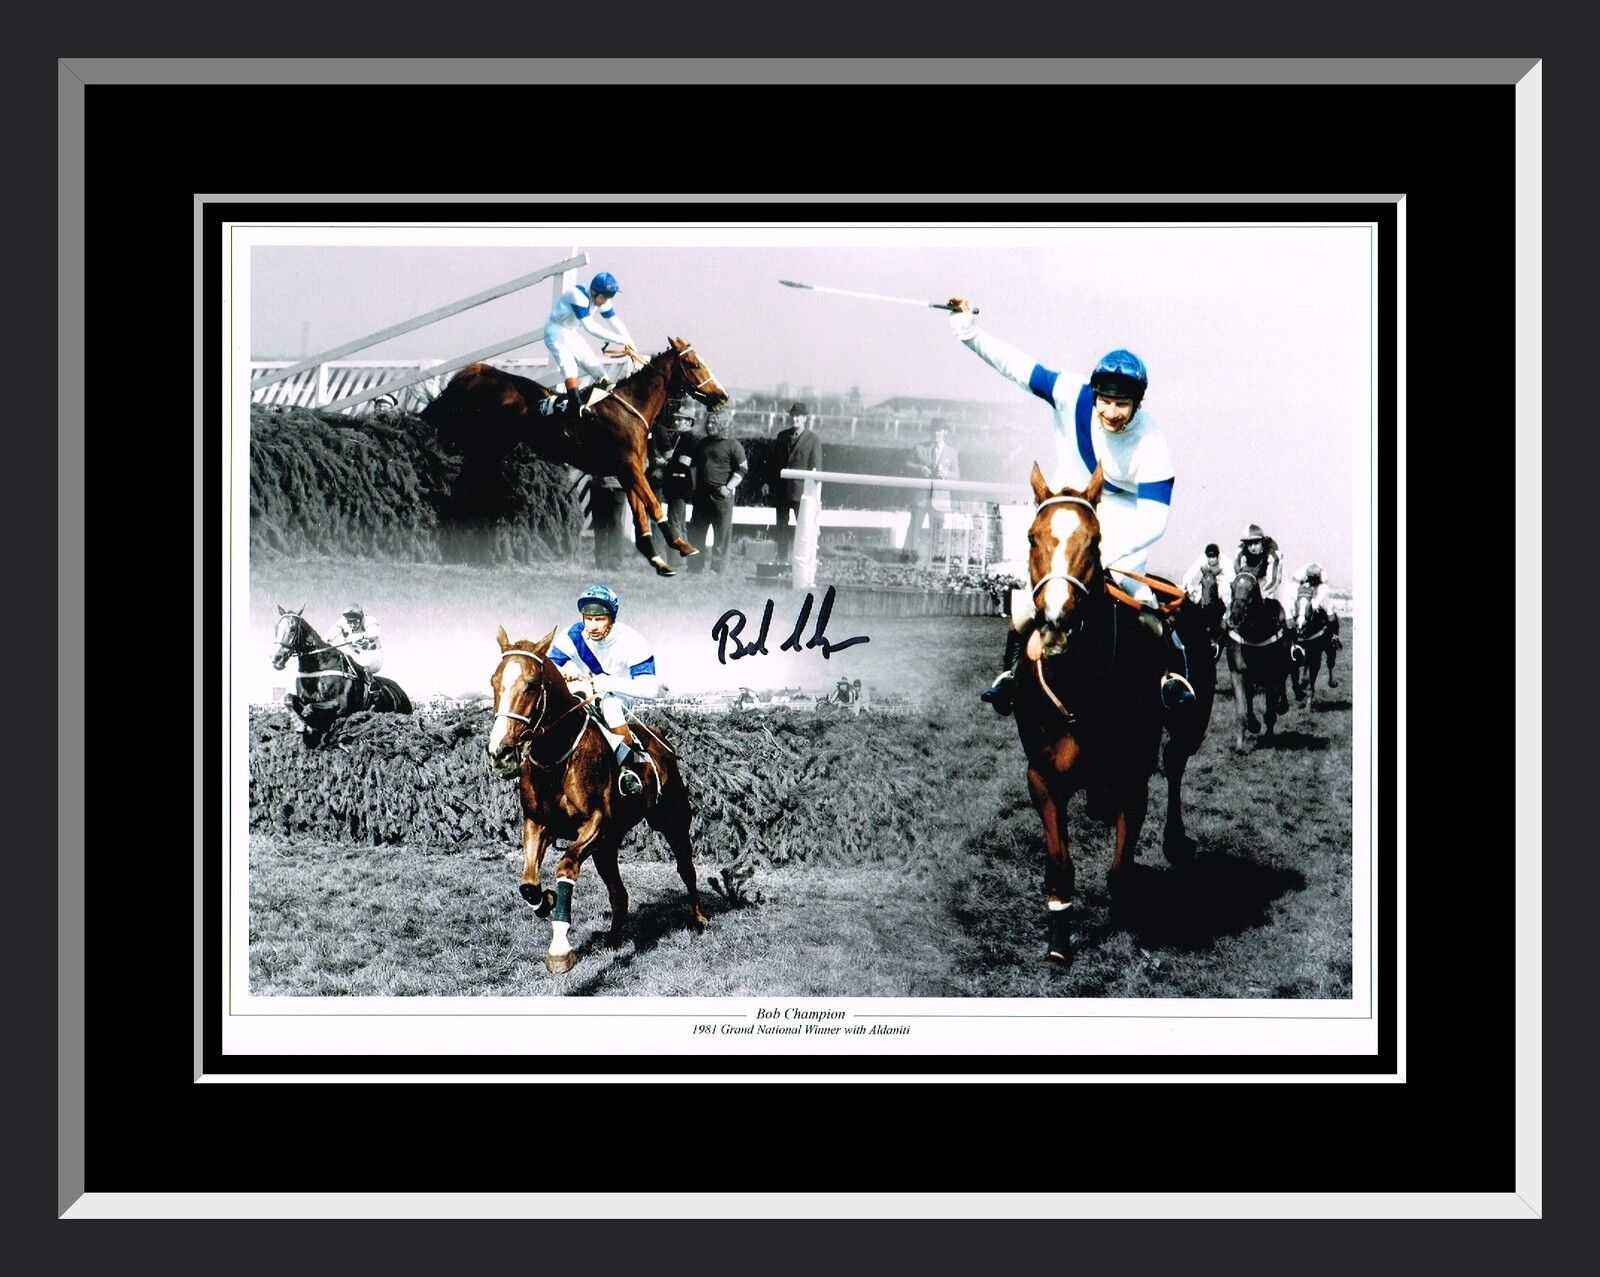 Bob Champion Signed Framed Horse Racing Photograph :A